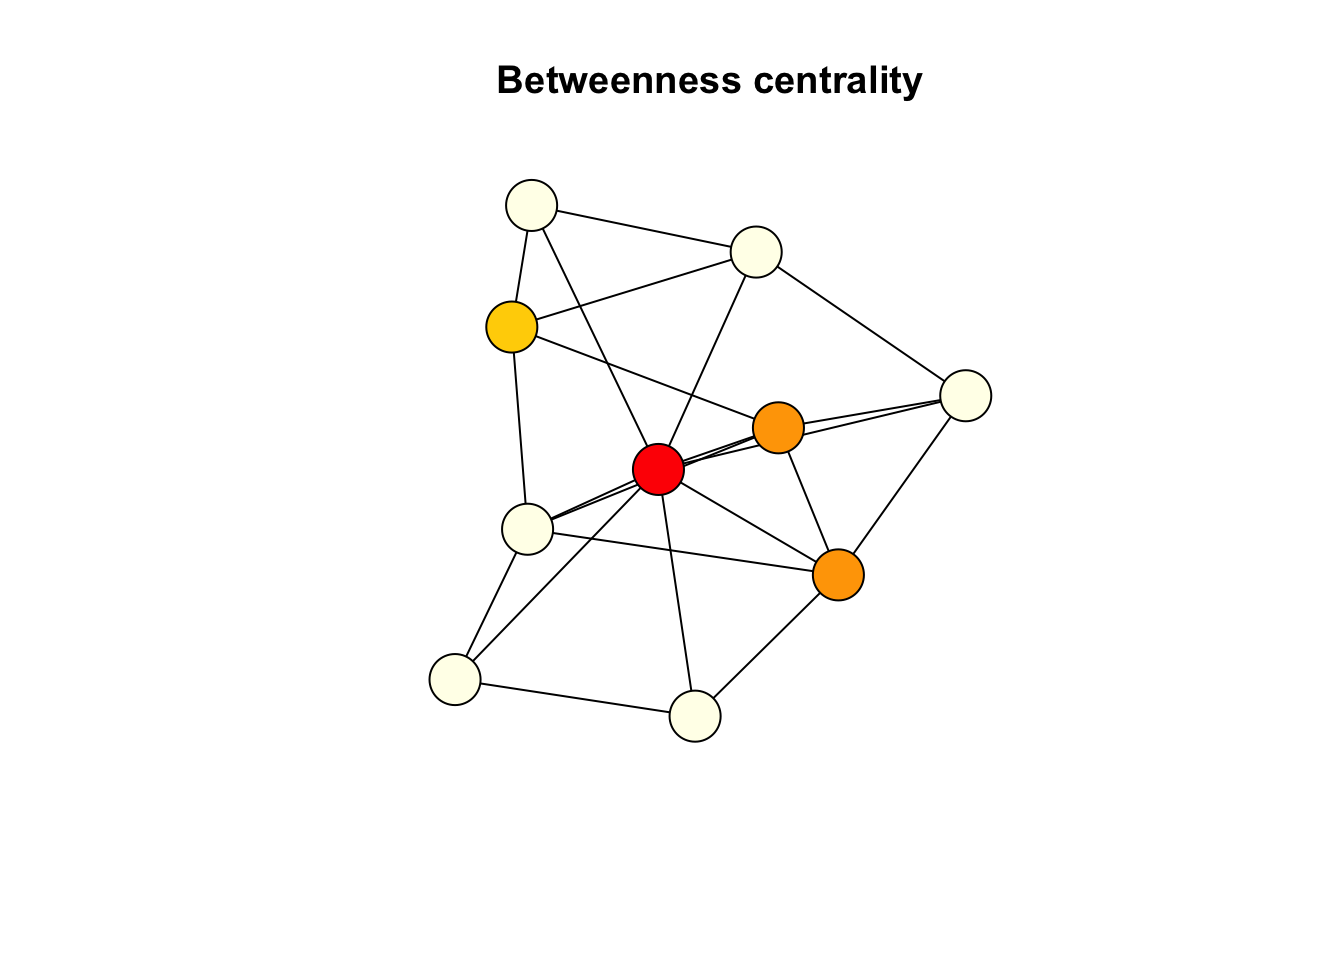 Example graph where nodes are coloured based on their betweenness centrality. 